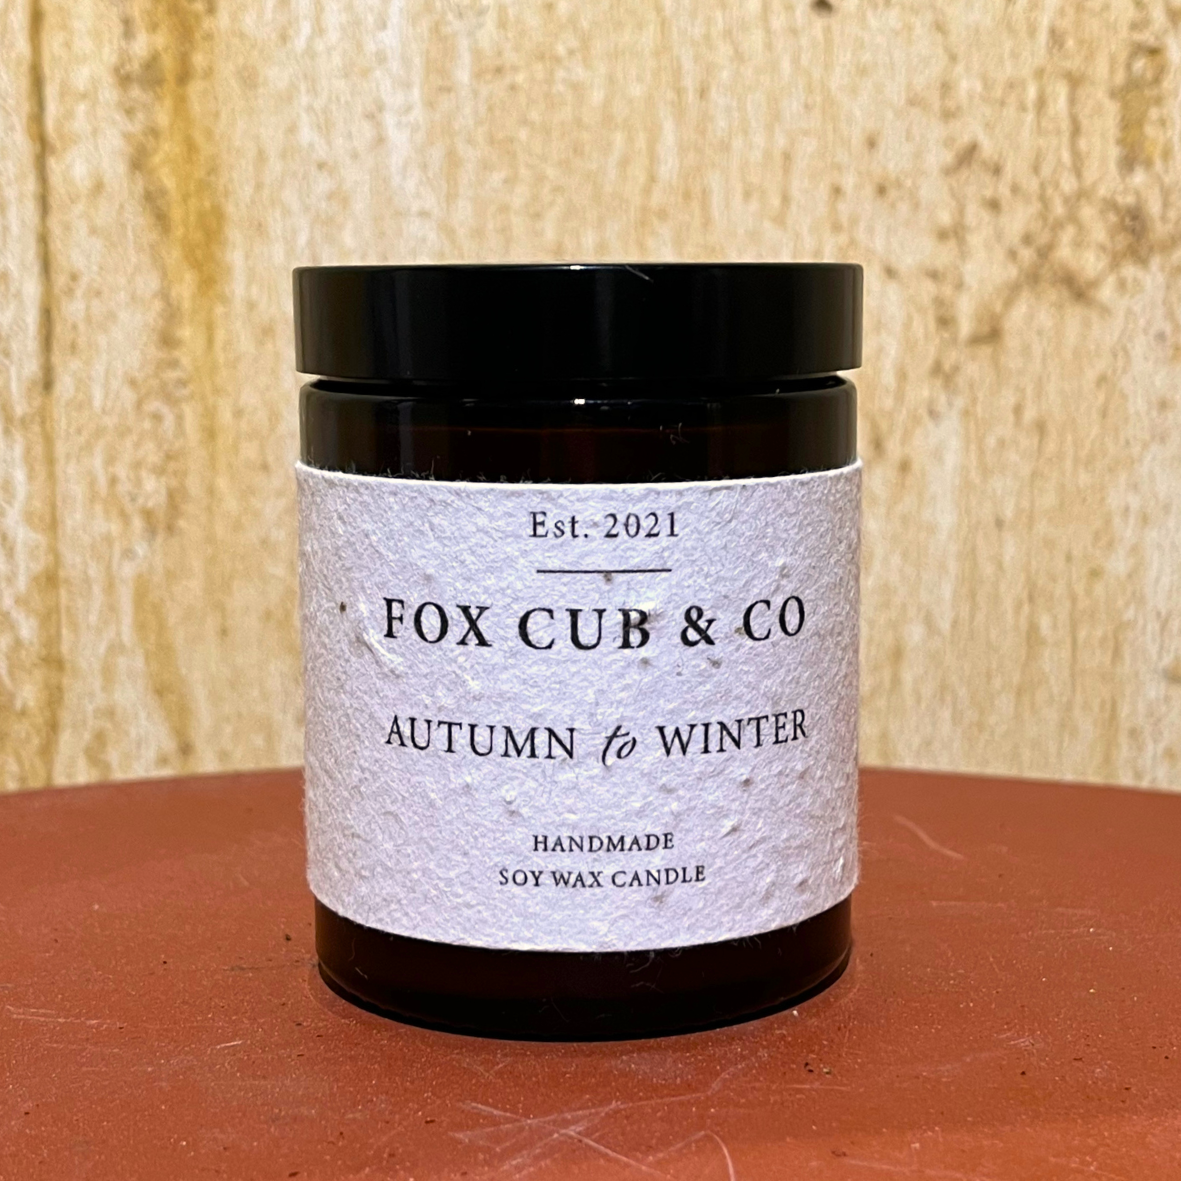 Autumn to Winter Scented Candle